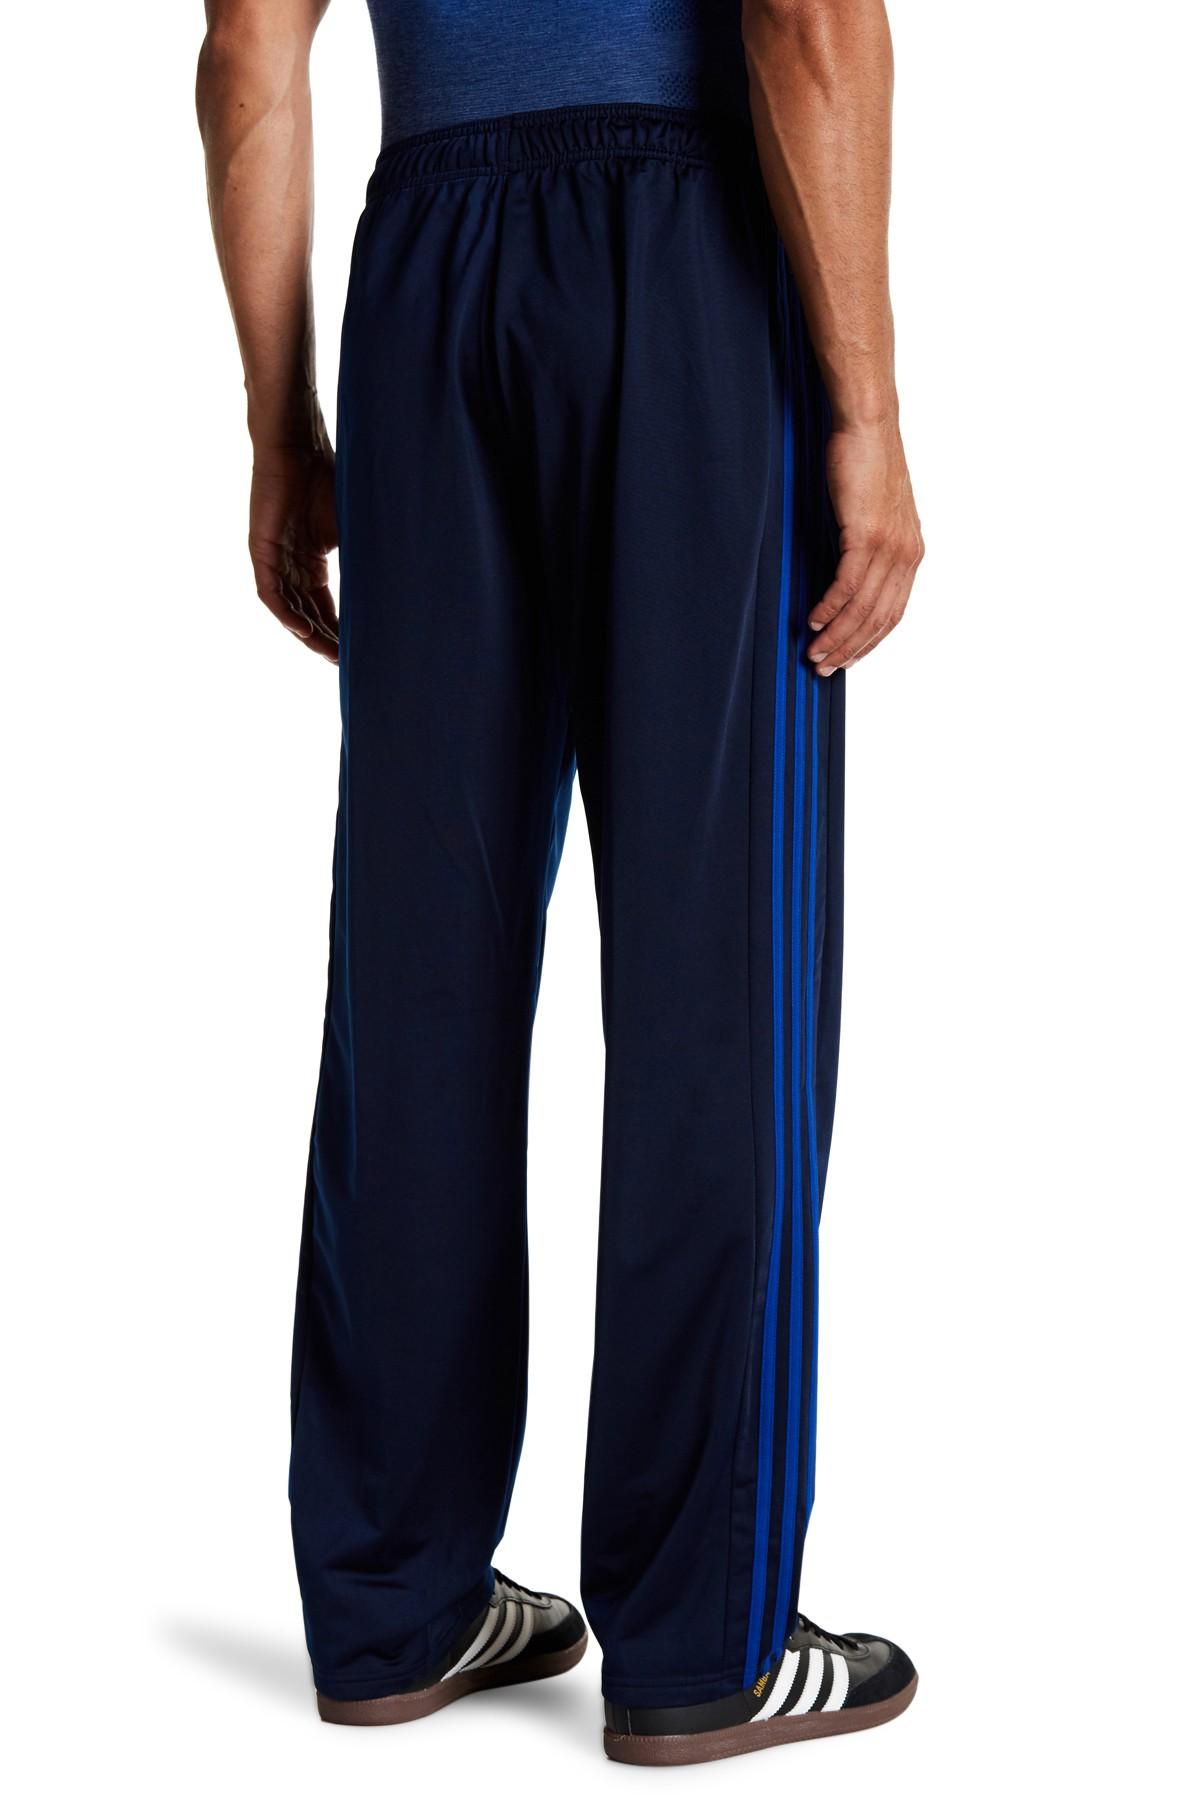 adidas Synthetic 3-stripe Track Pants in Blue for Men - Lyst